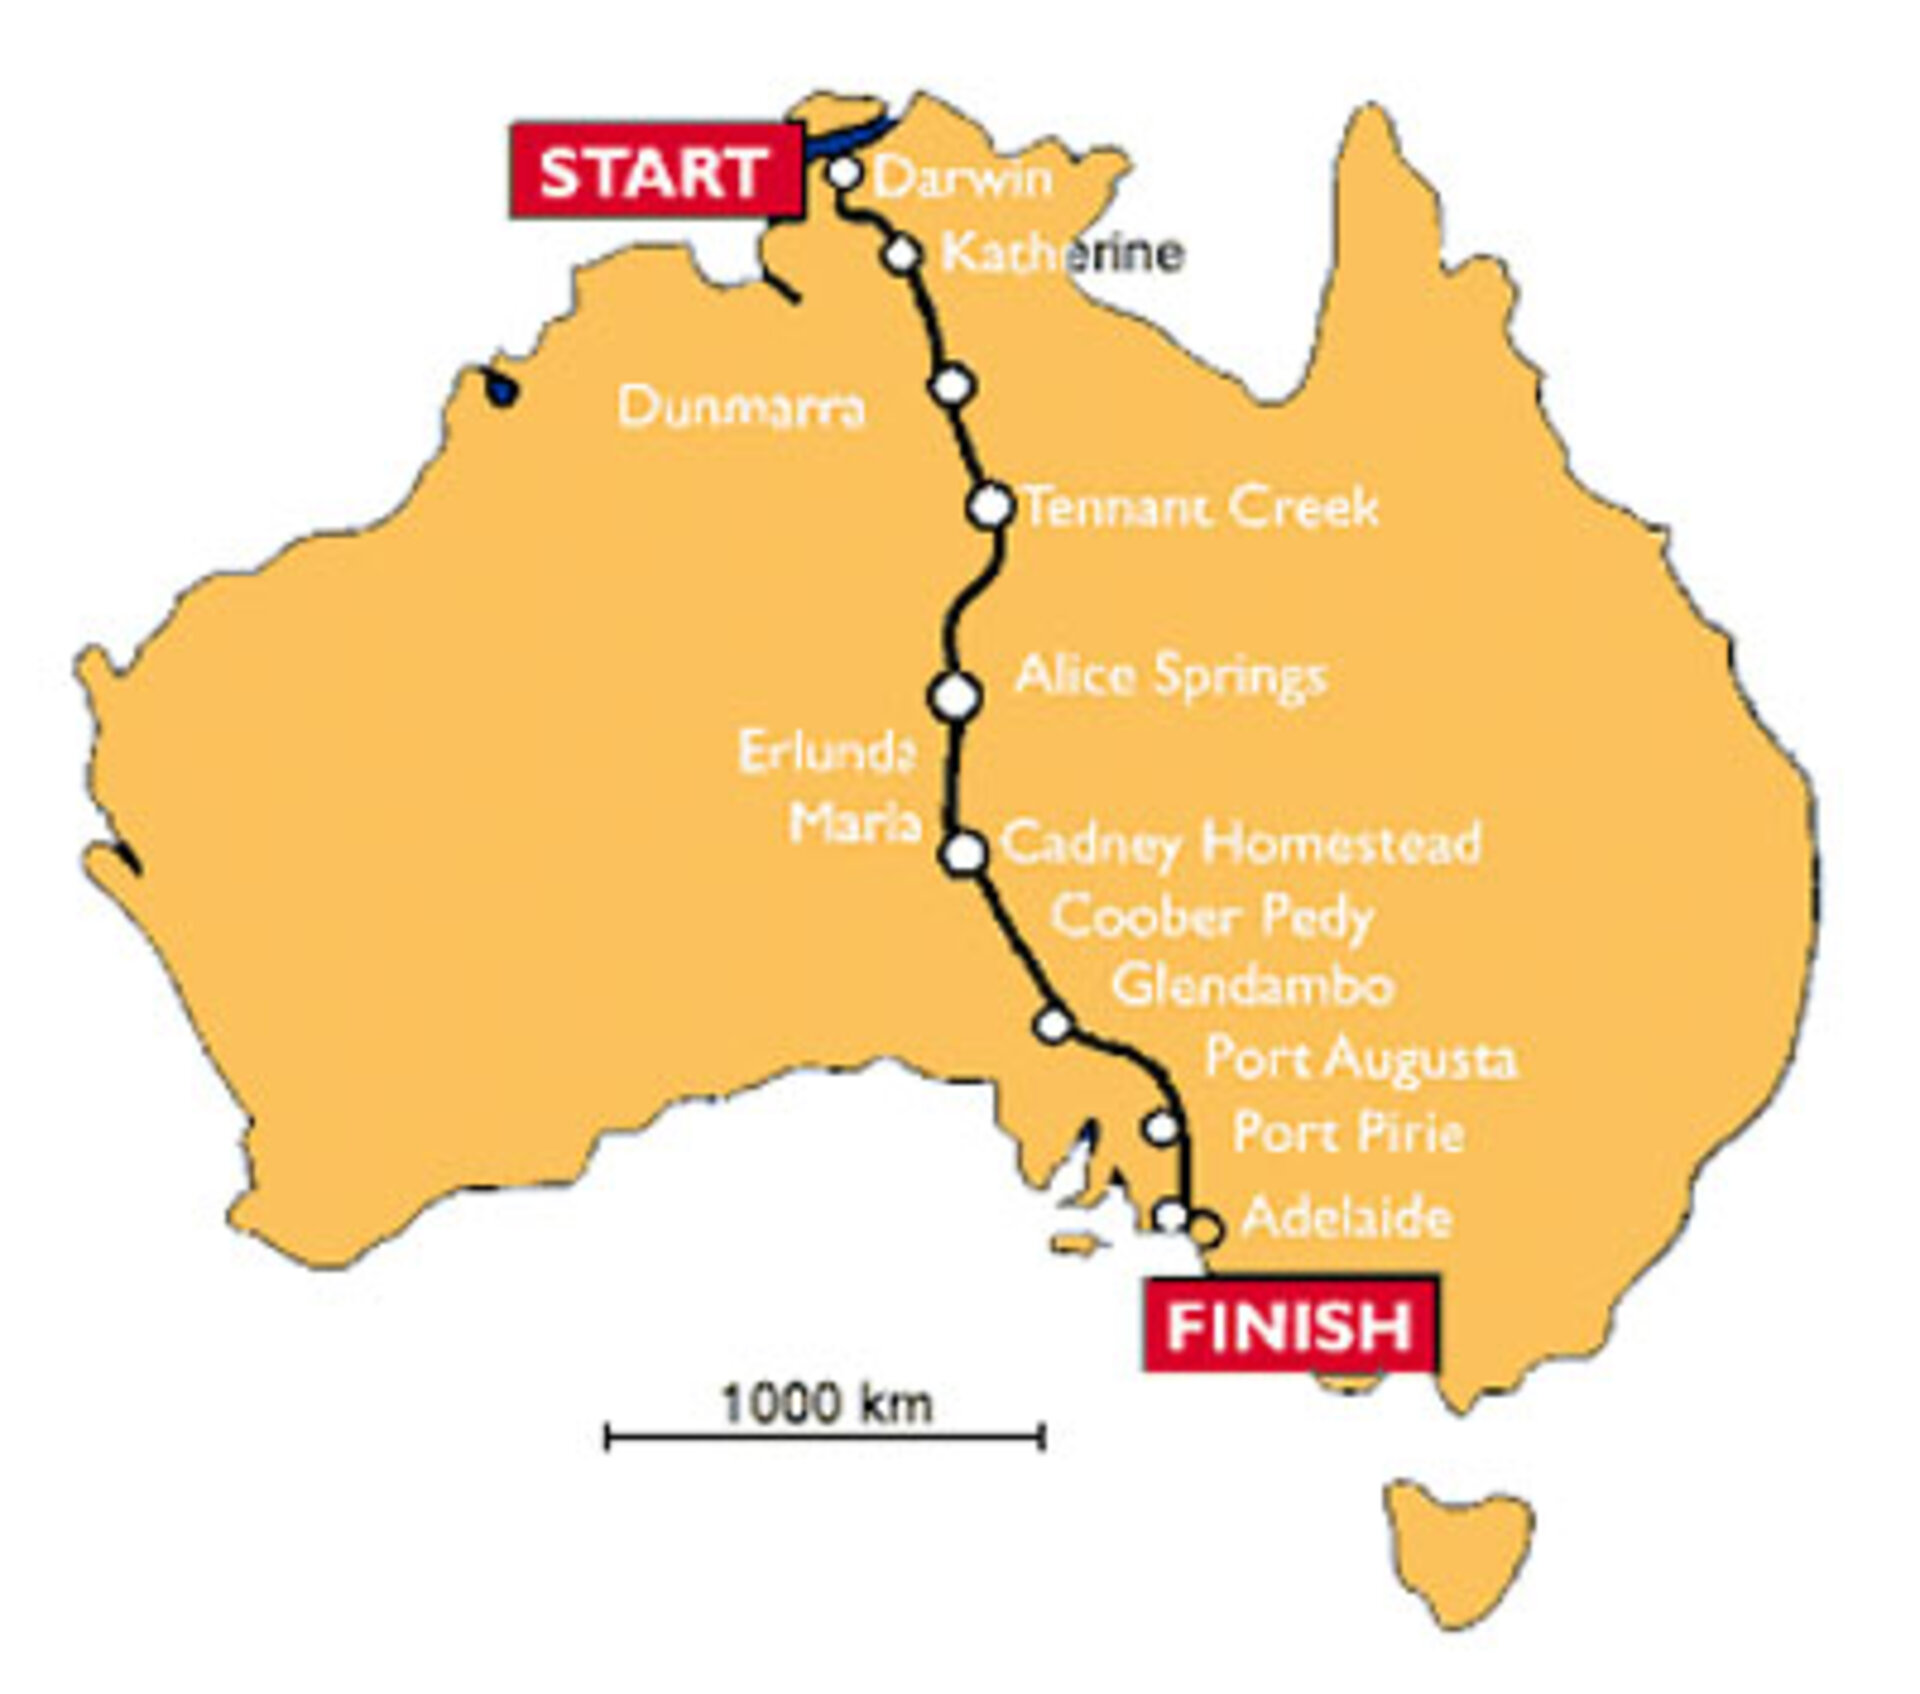 From start to finish the World Solar Challenge is 3010 km